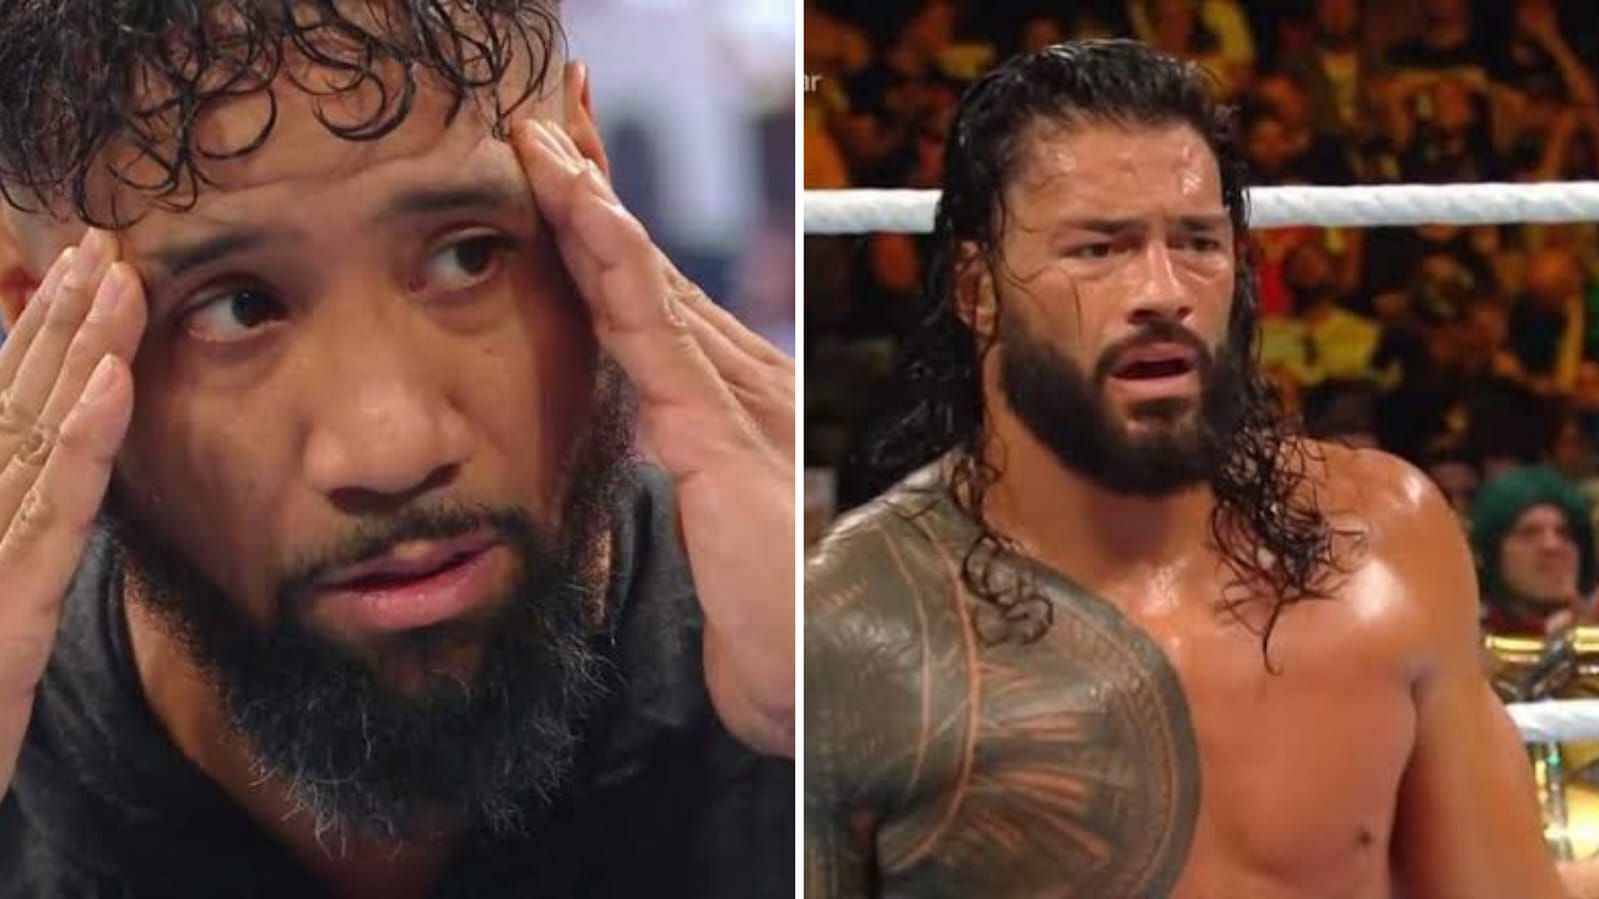 Roman Reigns and Jey Uso would clash at SummerSlam 2023.